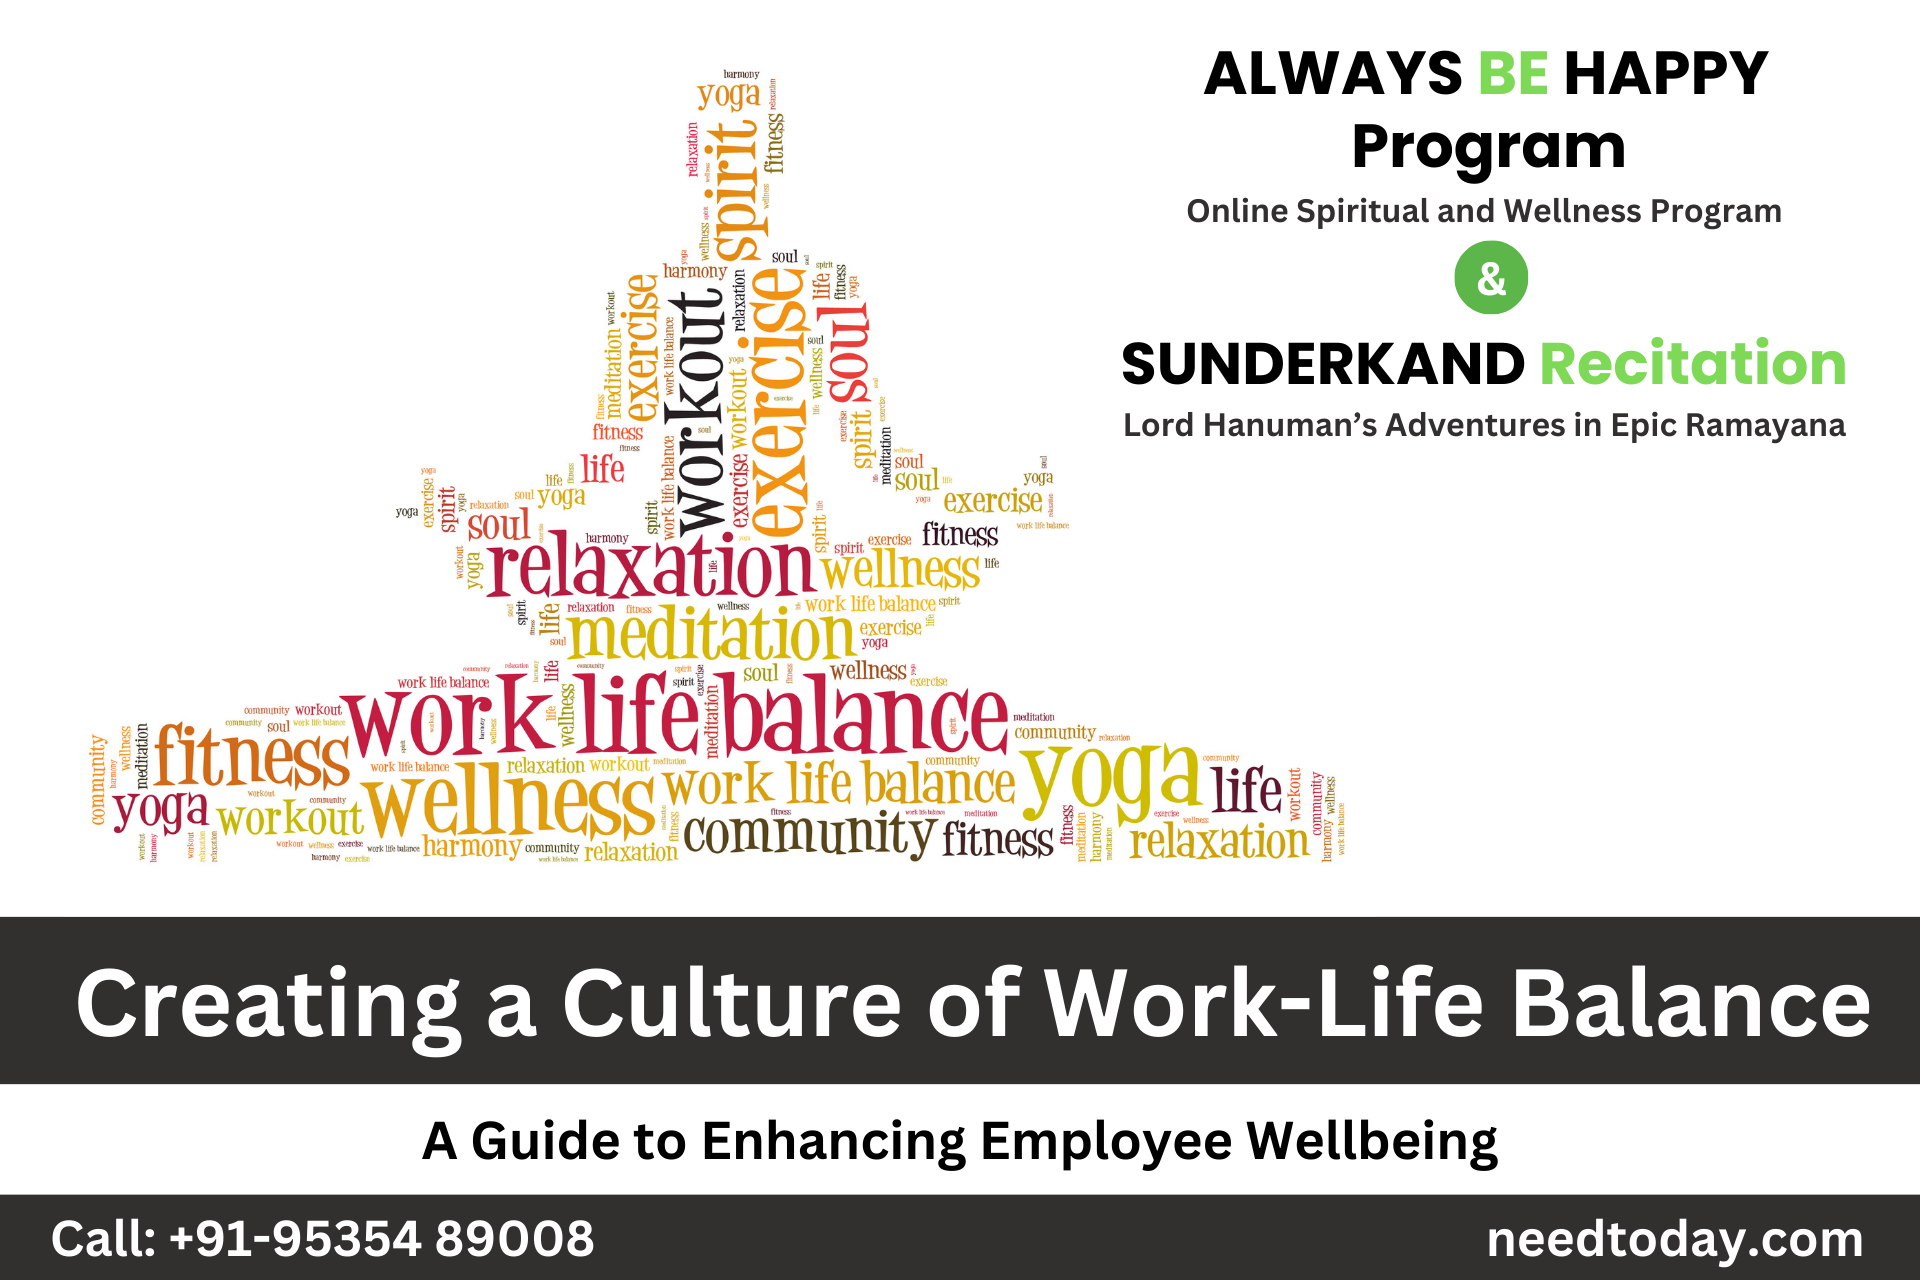 Creating a Culture of Work-Life Balance: A Guide to Enhancing Employee Wellbeing